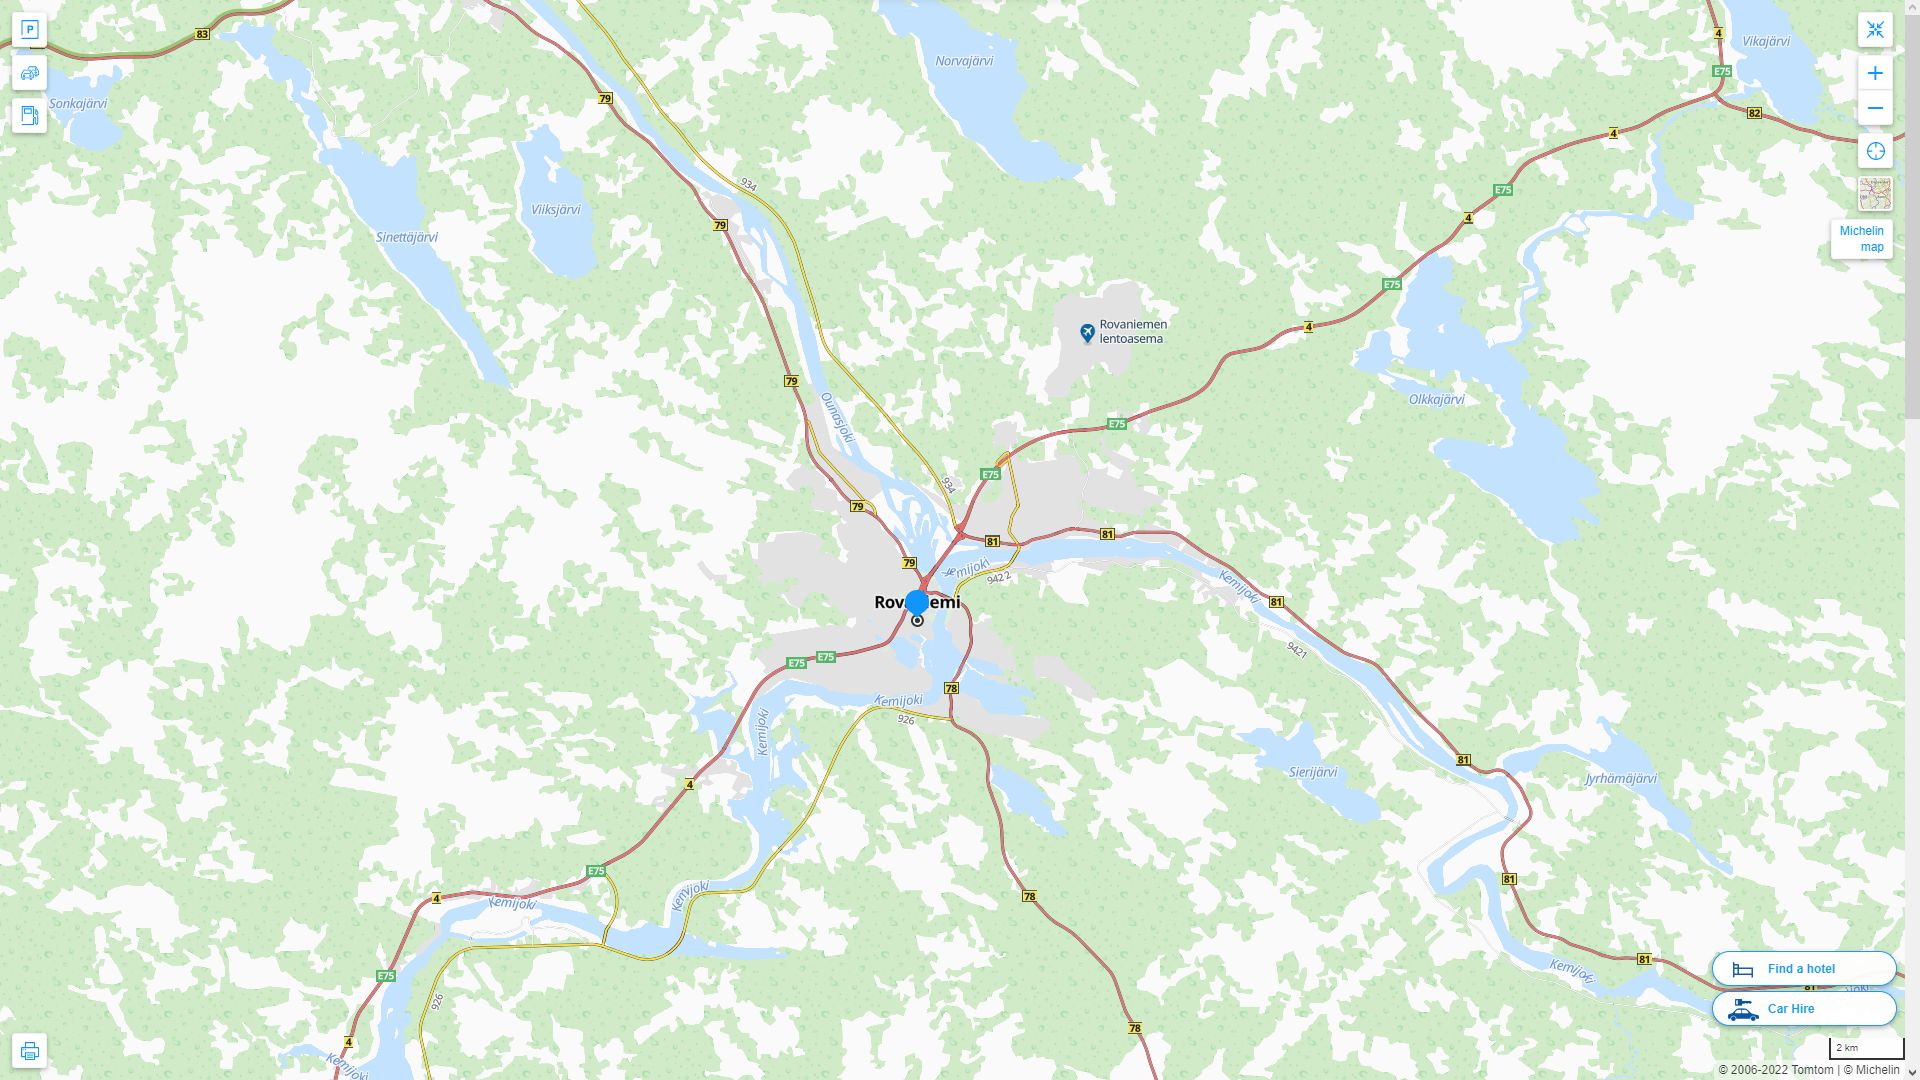 Rovaniemi Highway and Road Map